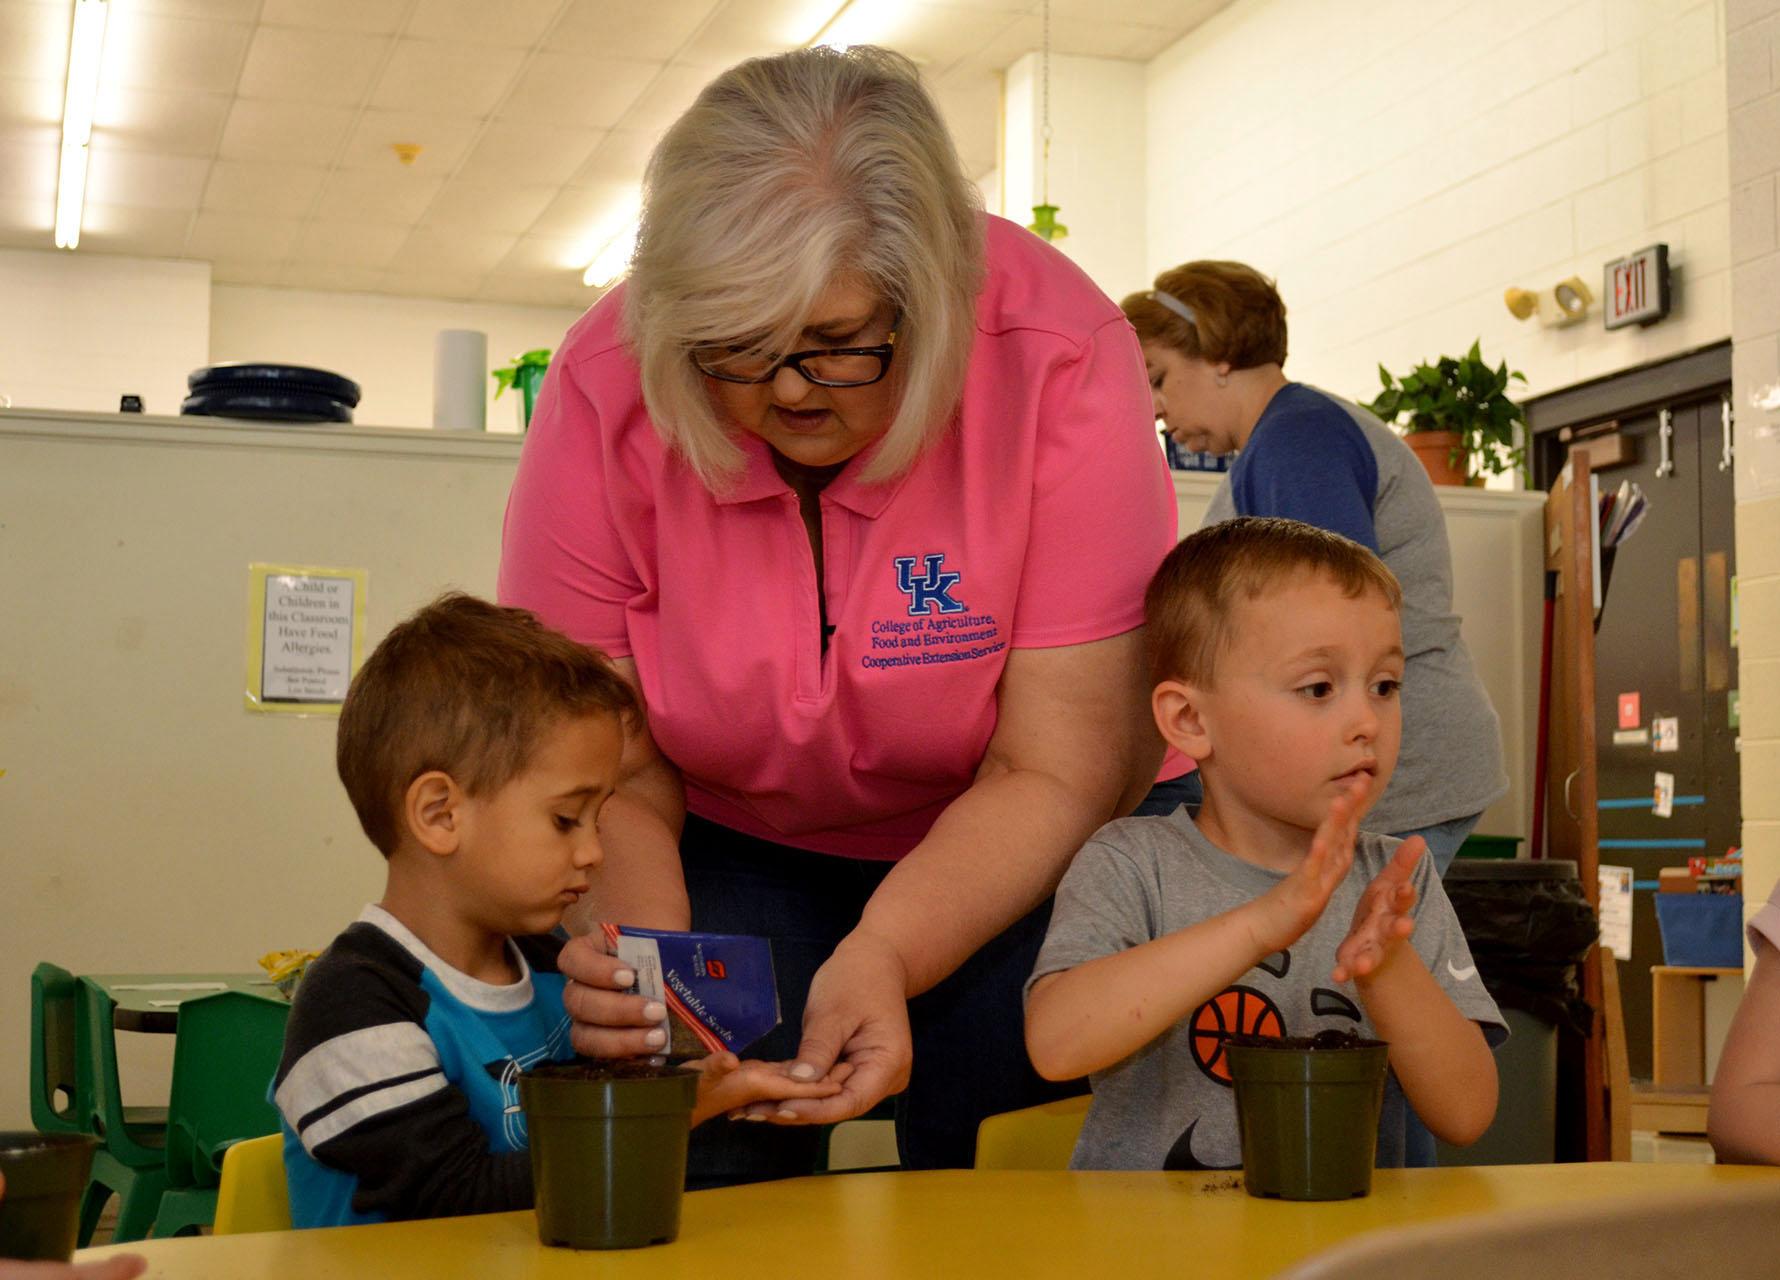 Boyd County horticulture extension agent Lori Bowling gives lettuce seeds to Jamar Higgs, left, as Talin Holbrook looks on. The boys are students at the Early Childhood Learning Center-North in Ashland. Photo by Katie Pratt, UK agricultural communications